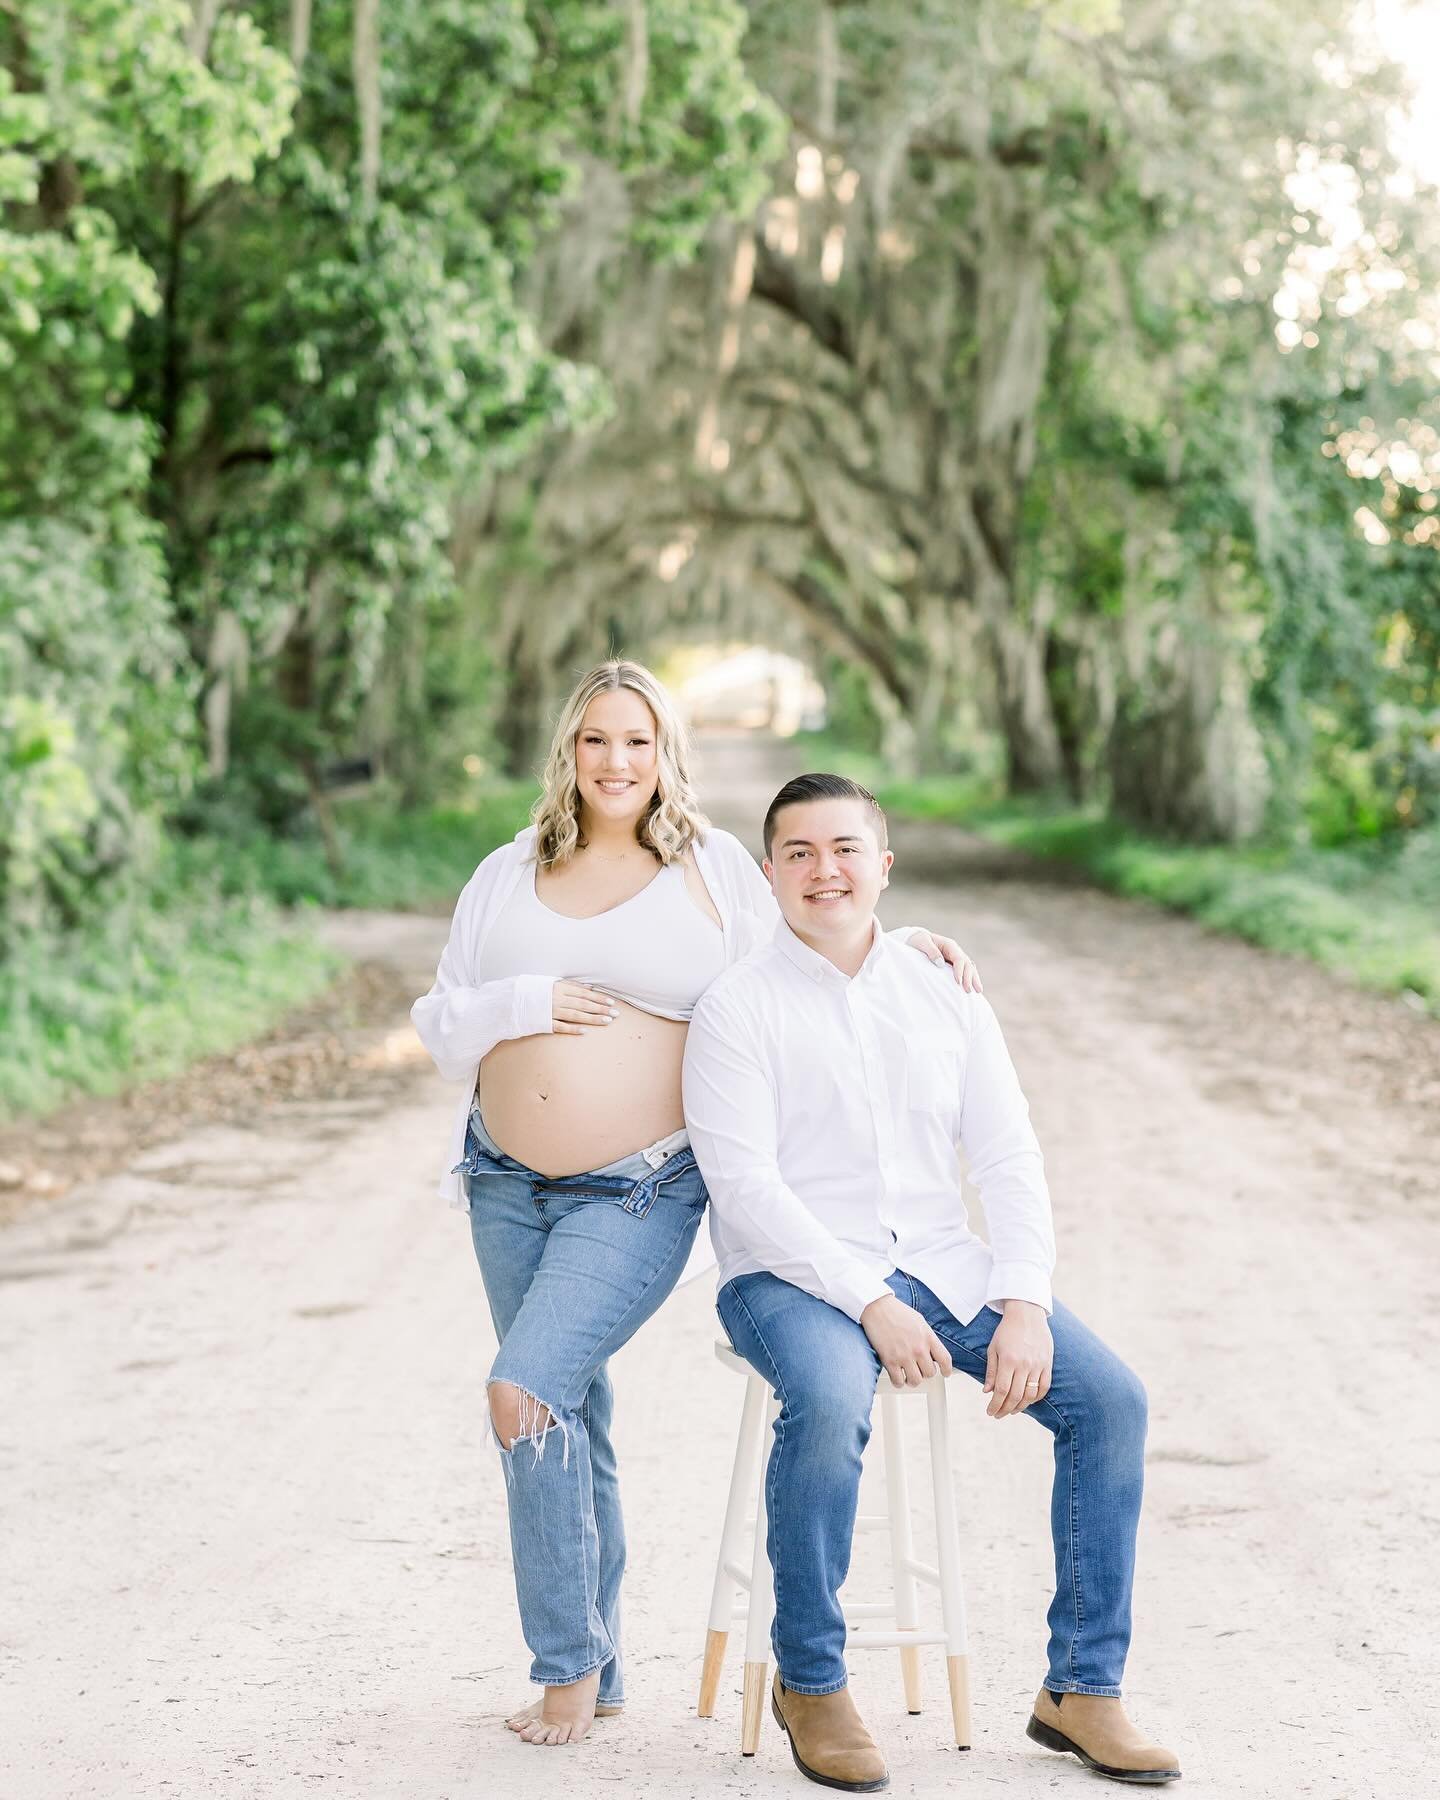 Waiting on this sweet summer babe 🩵
Ali, thanks for trusting the process, and creating these amazing maternity portraits with me! I can&rsquo;t wait to watch you loving on this baby boy, and making sure he loves trash pandas as much as we do!